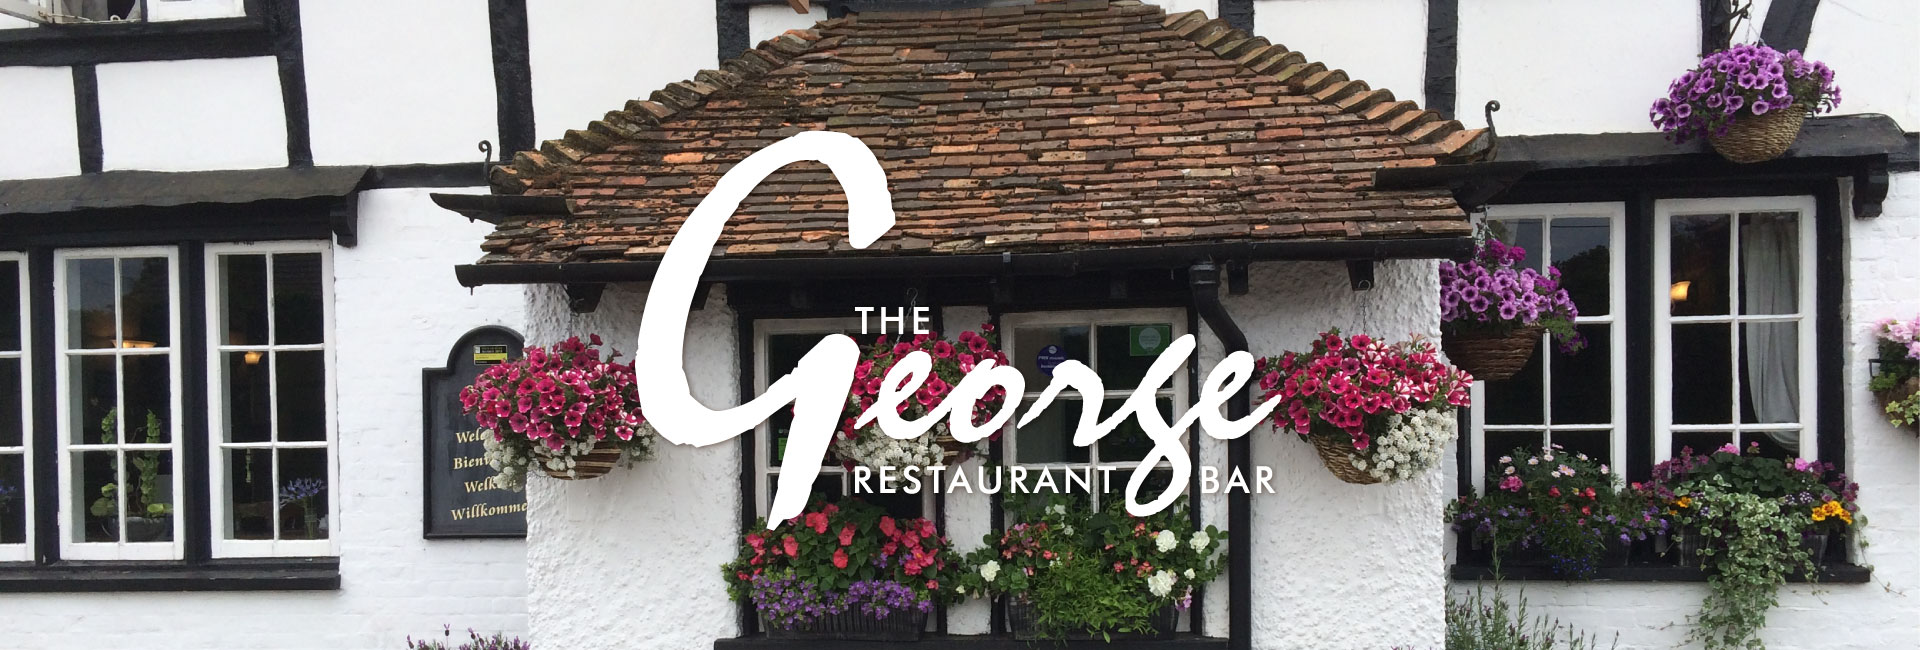 Thank you for contacting The George Restaurant and Bar Molash